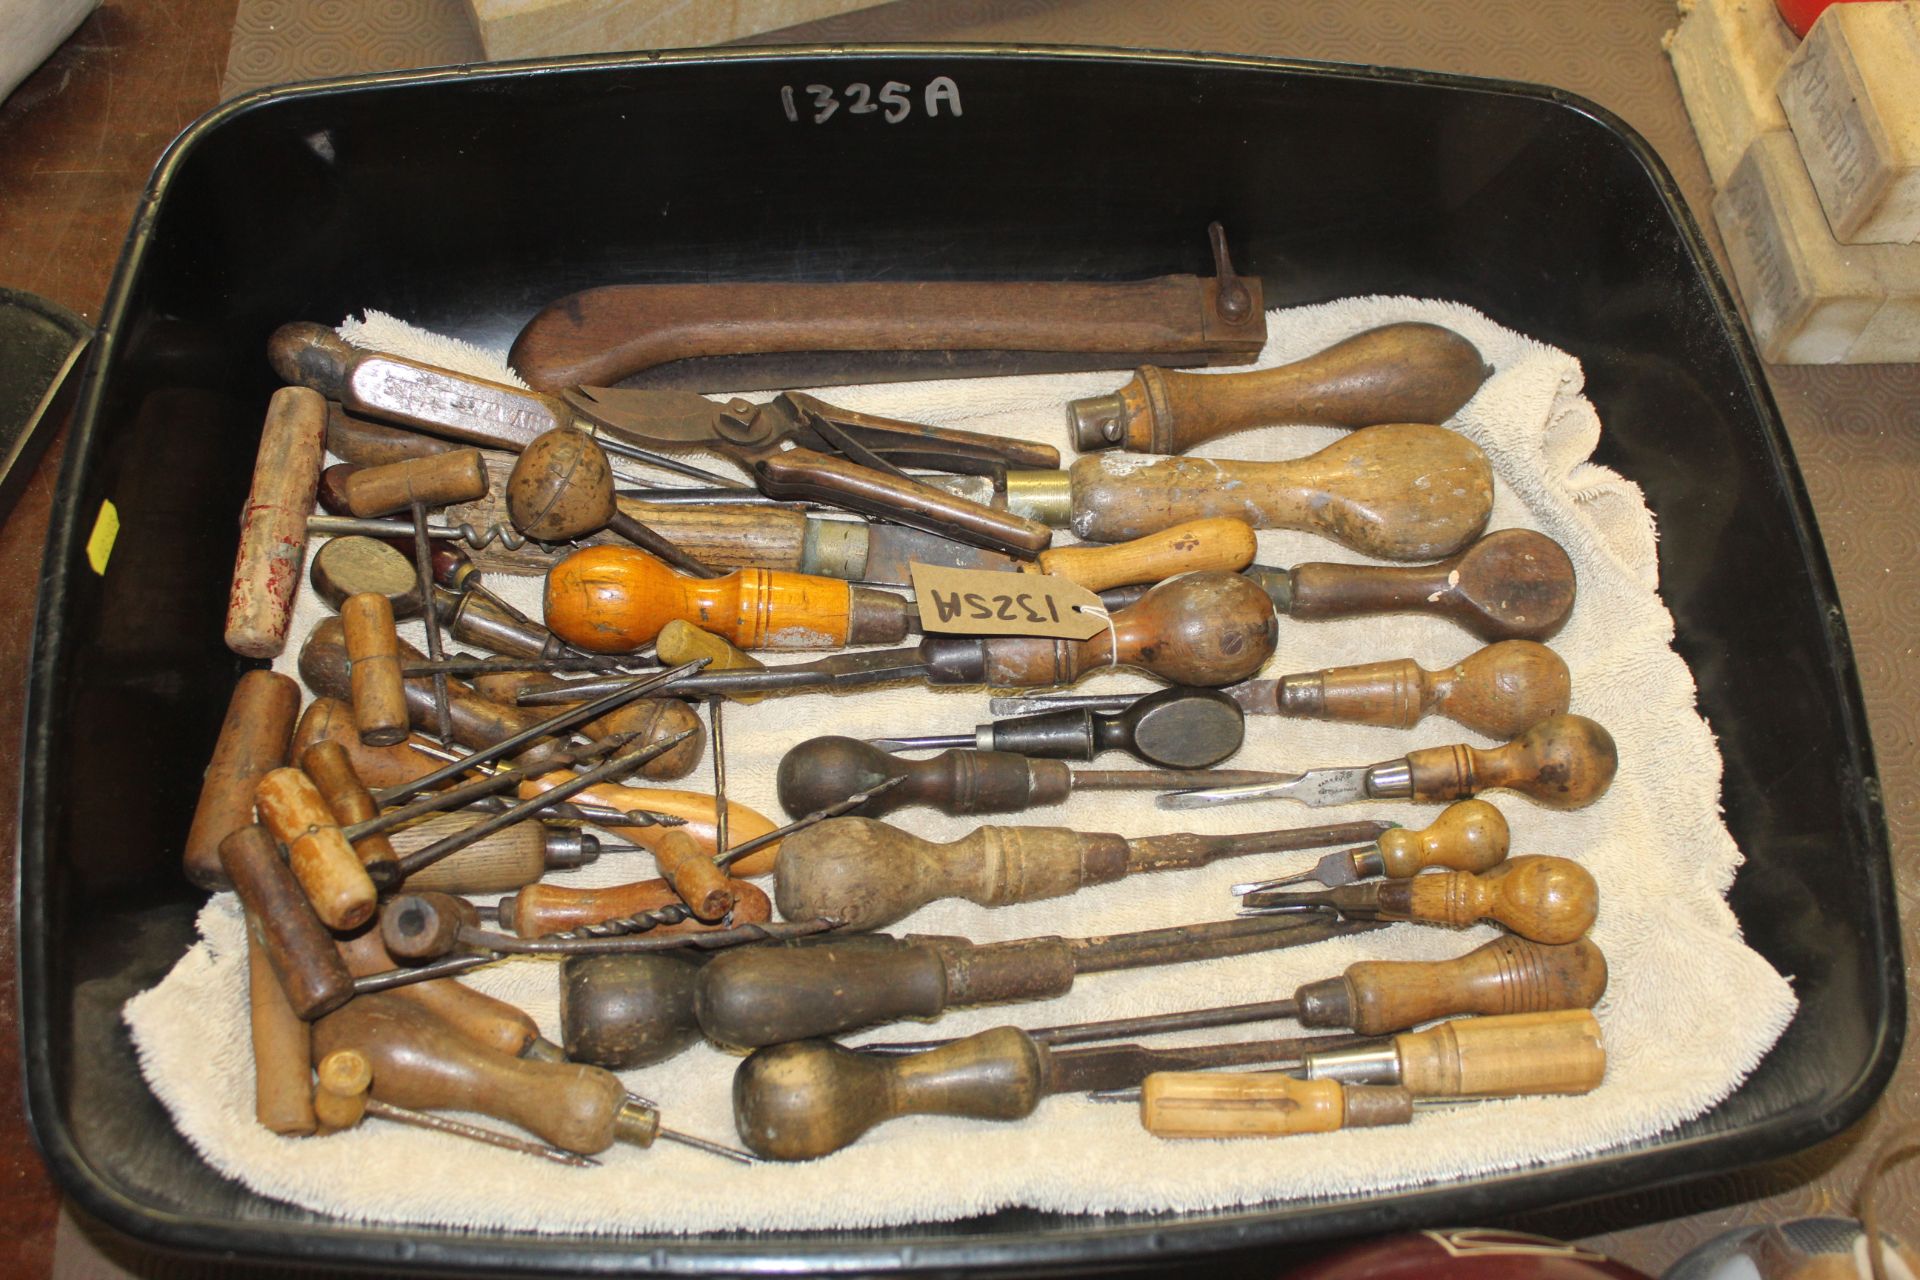 A quantity of various wooden handled hand tools in